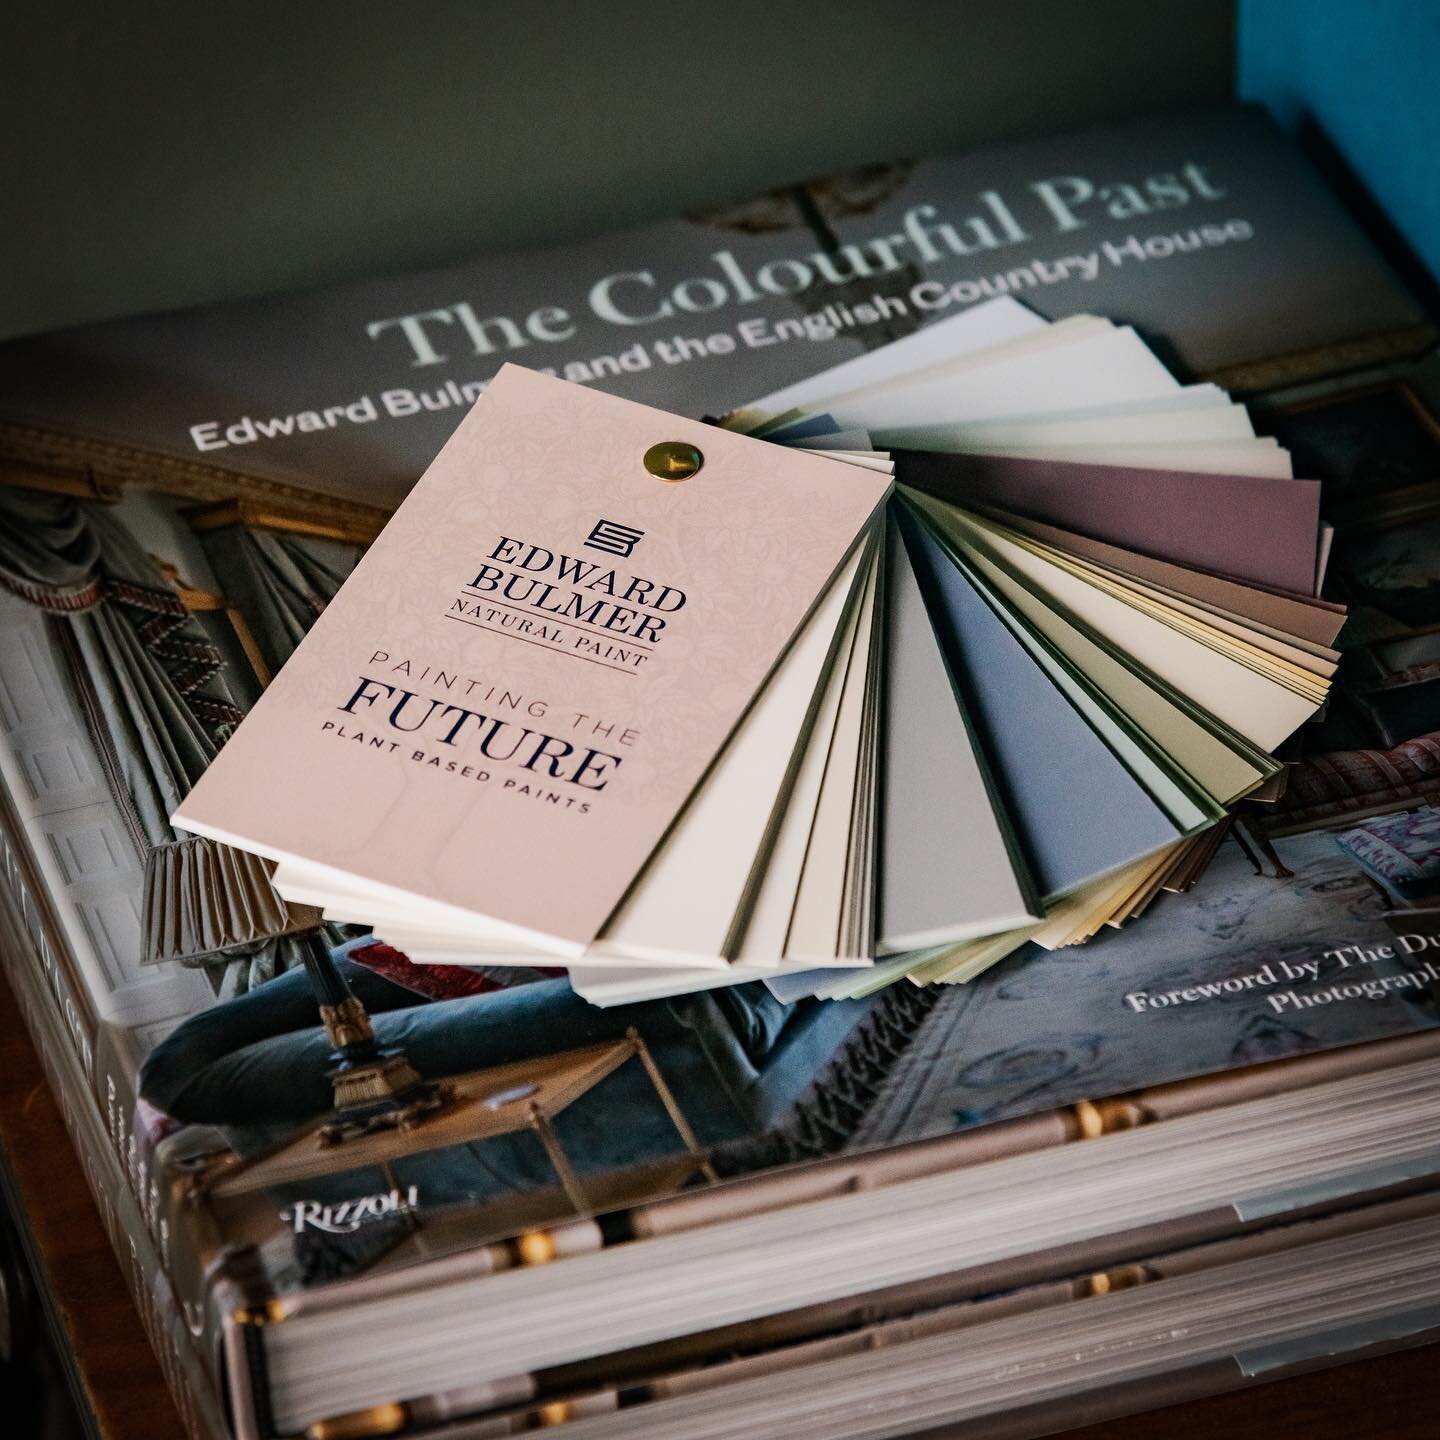 At Noble, you can pick up your Edward Bulmer Natural Paint sample pots and colour charts, as well as order your paint for collection in store. 

We also now have the fan decks as photographed and of course, copies of Edward&rsquo;s wonderful book!

?